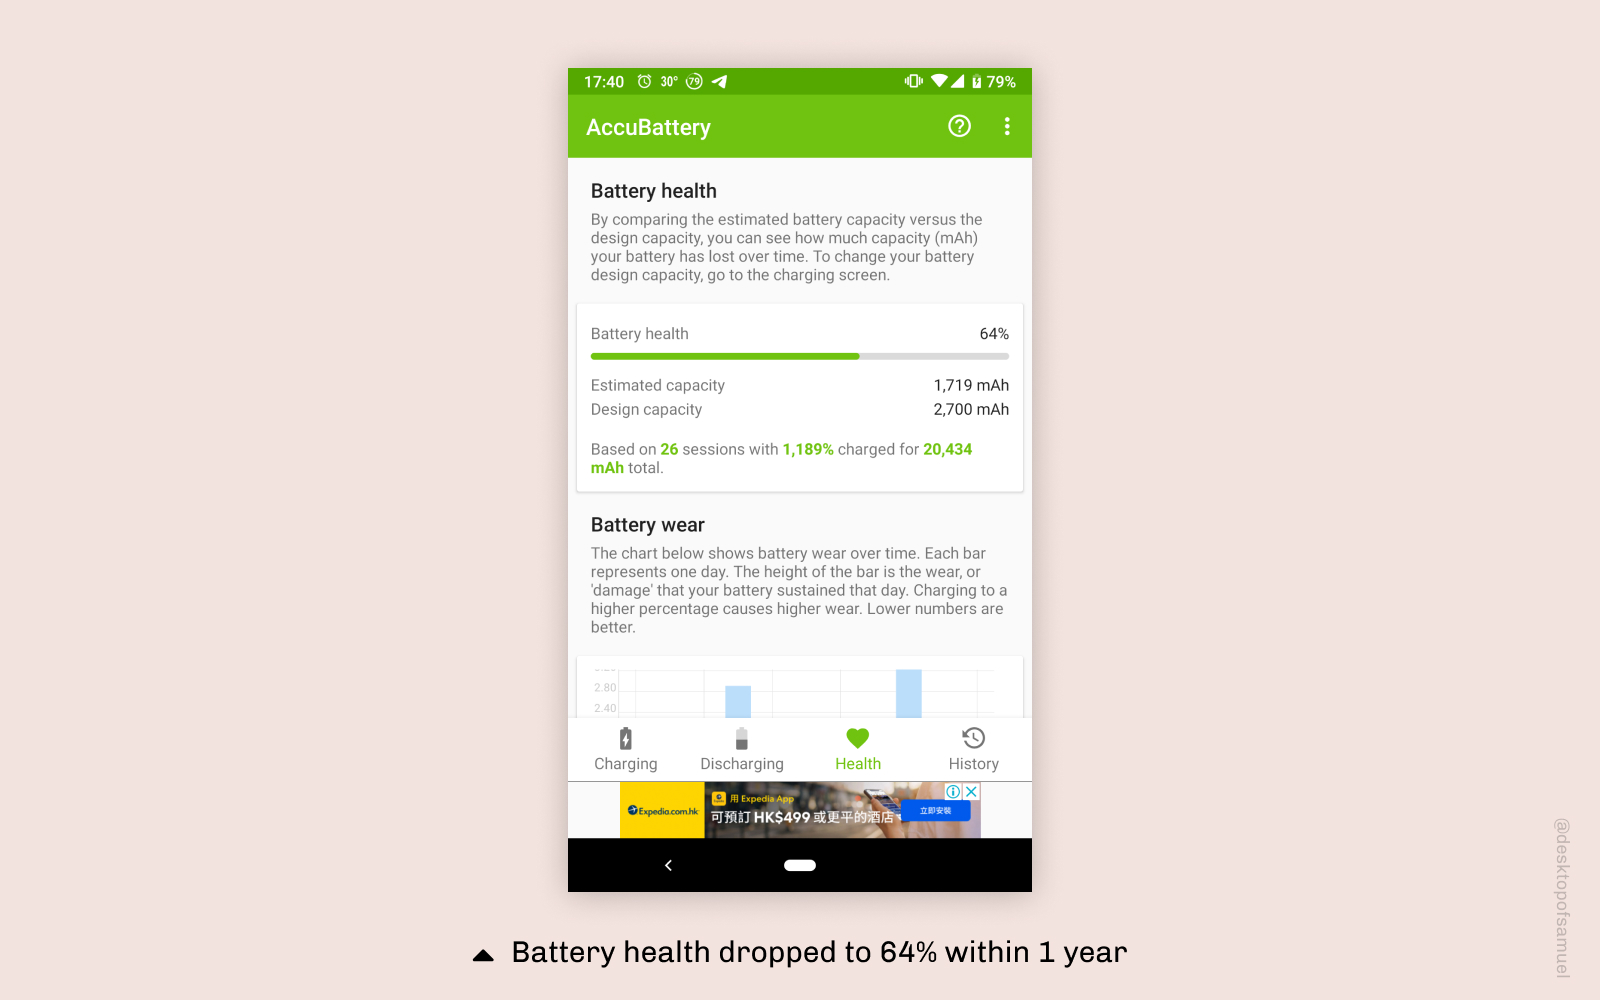 Battery health dropped to 64% within 1 year